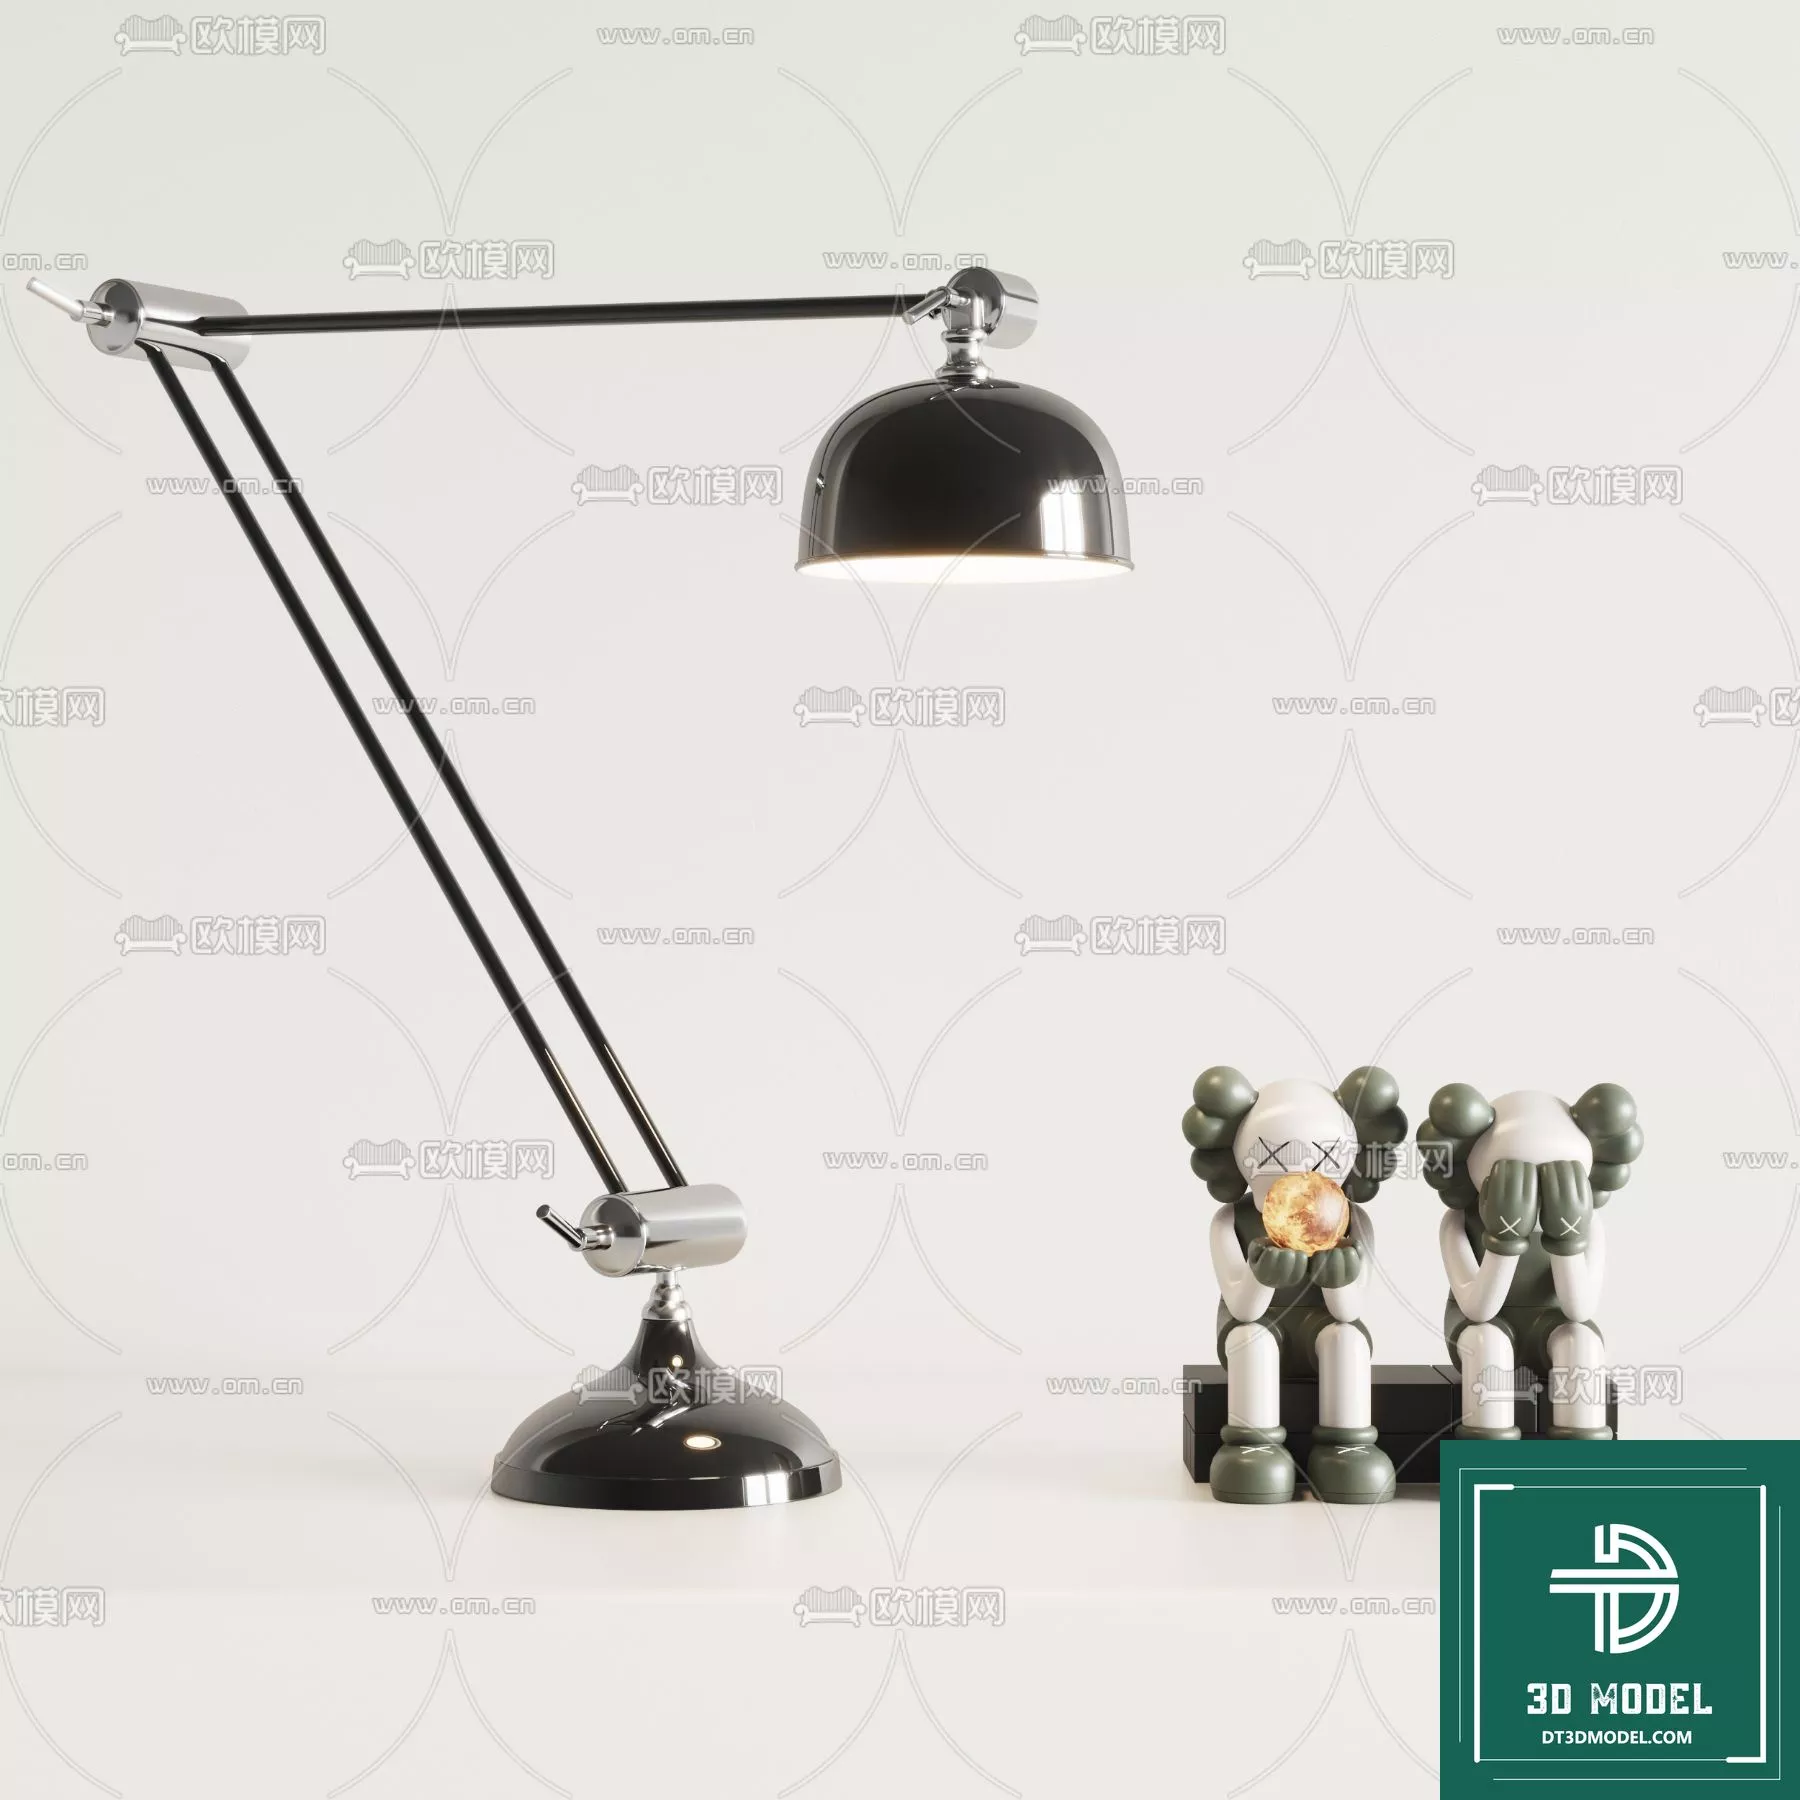 MODERN TABLE LAMP - SKETCHUP 3D MODEL - VRAY OR ENSCAPE - ID14509